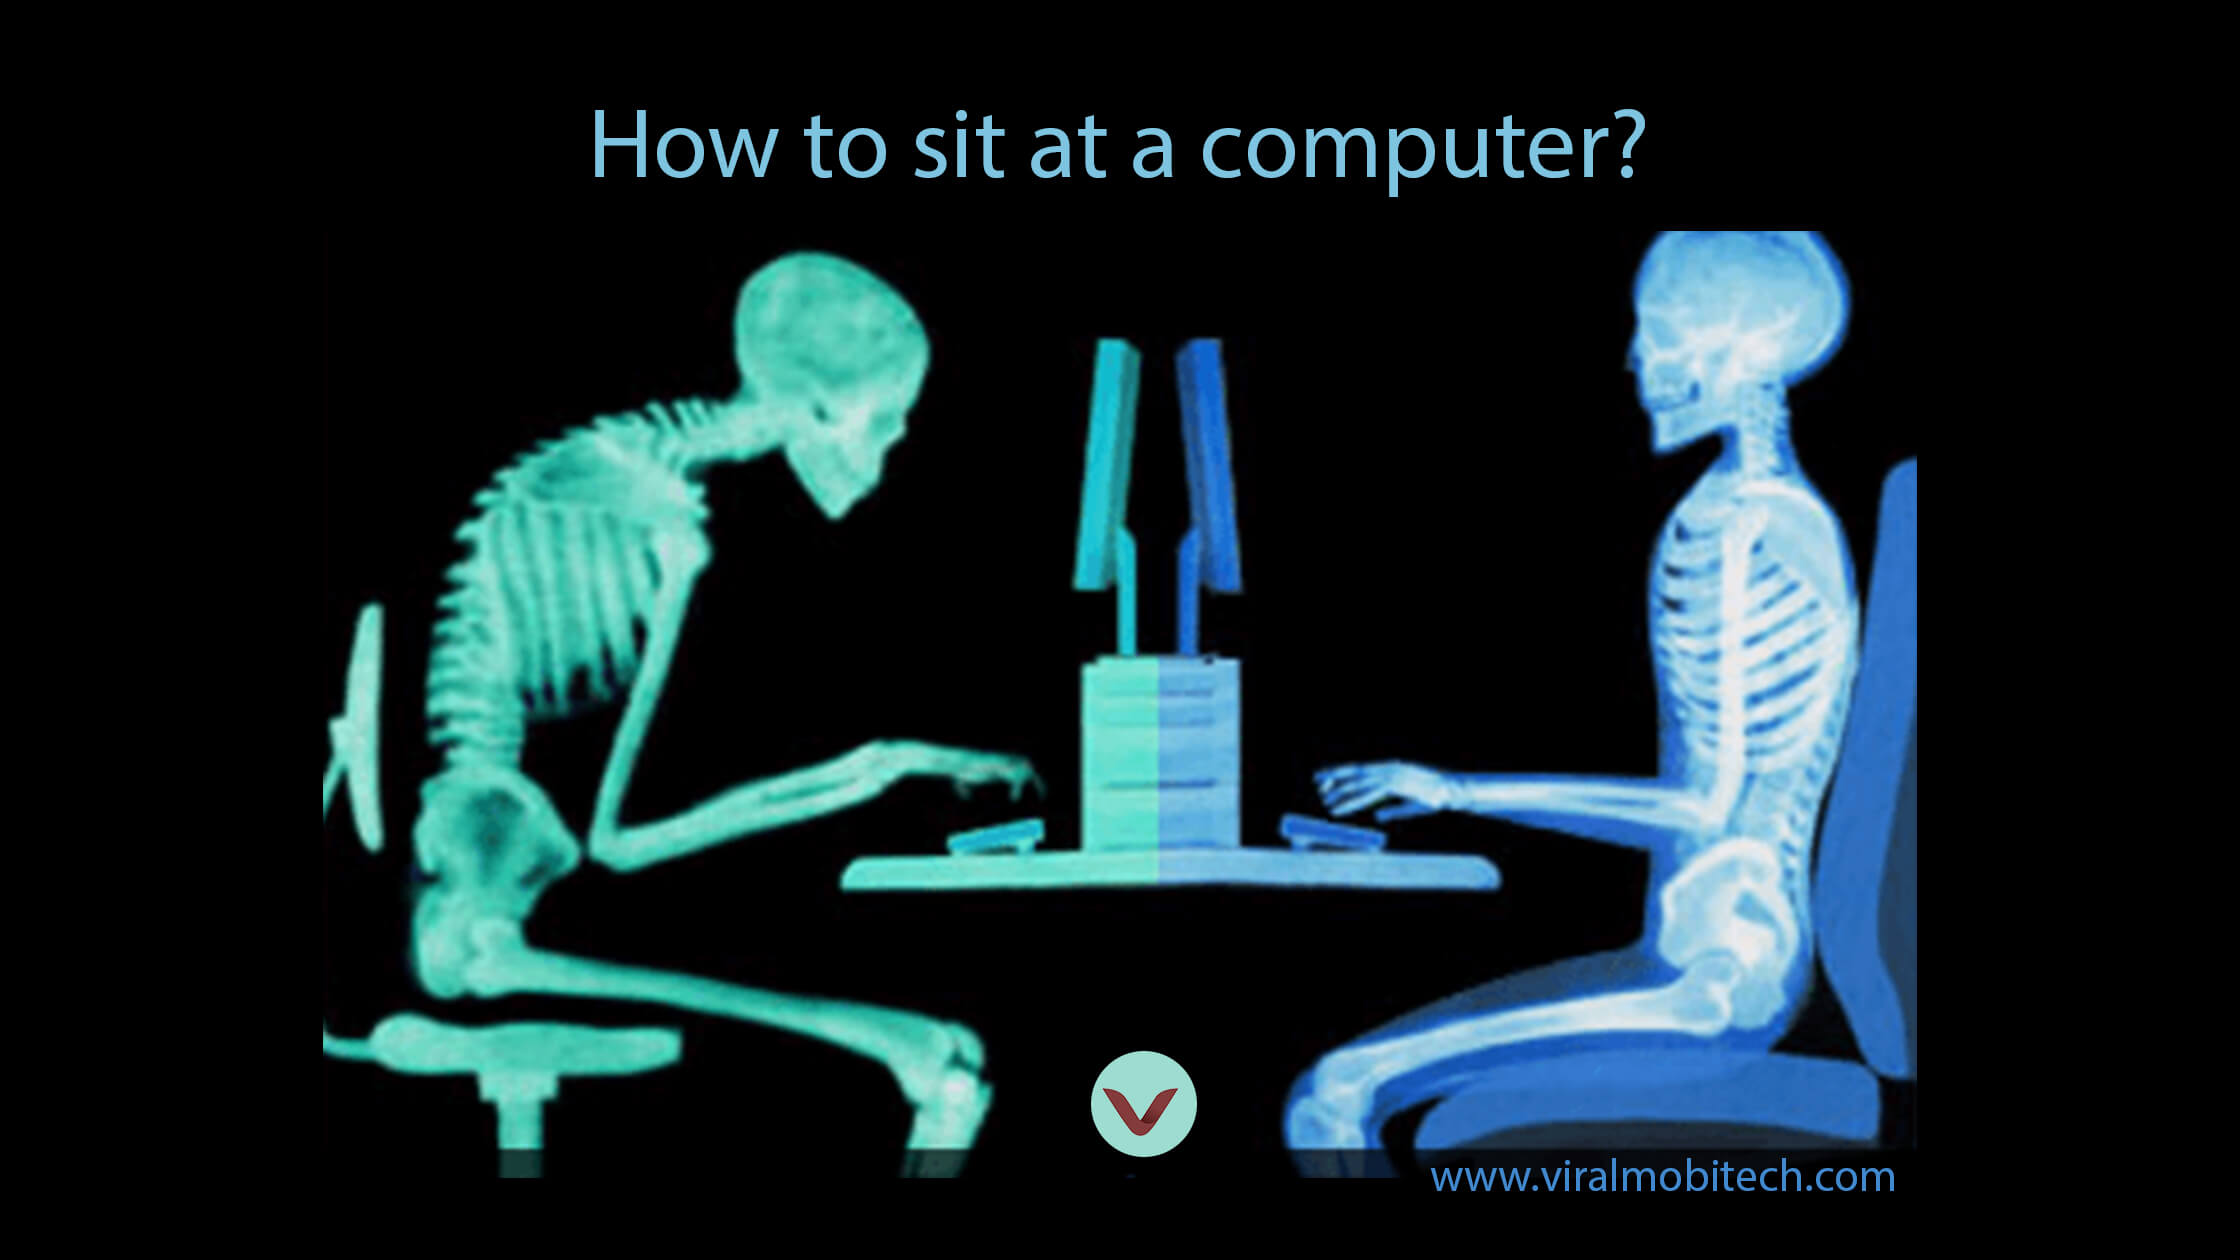 How to sit at a computer?